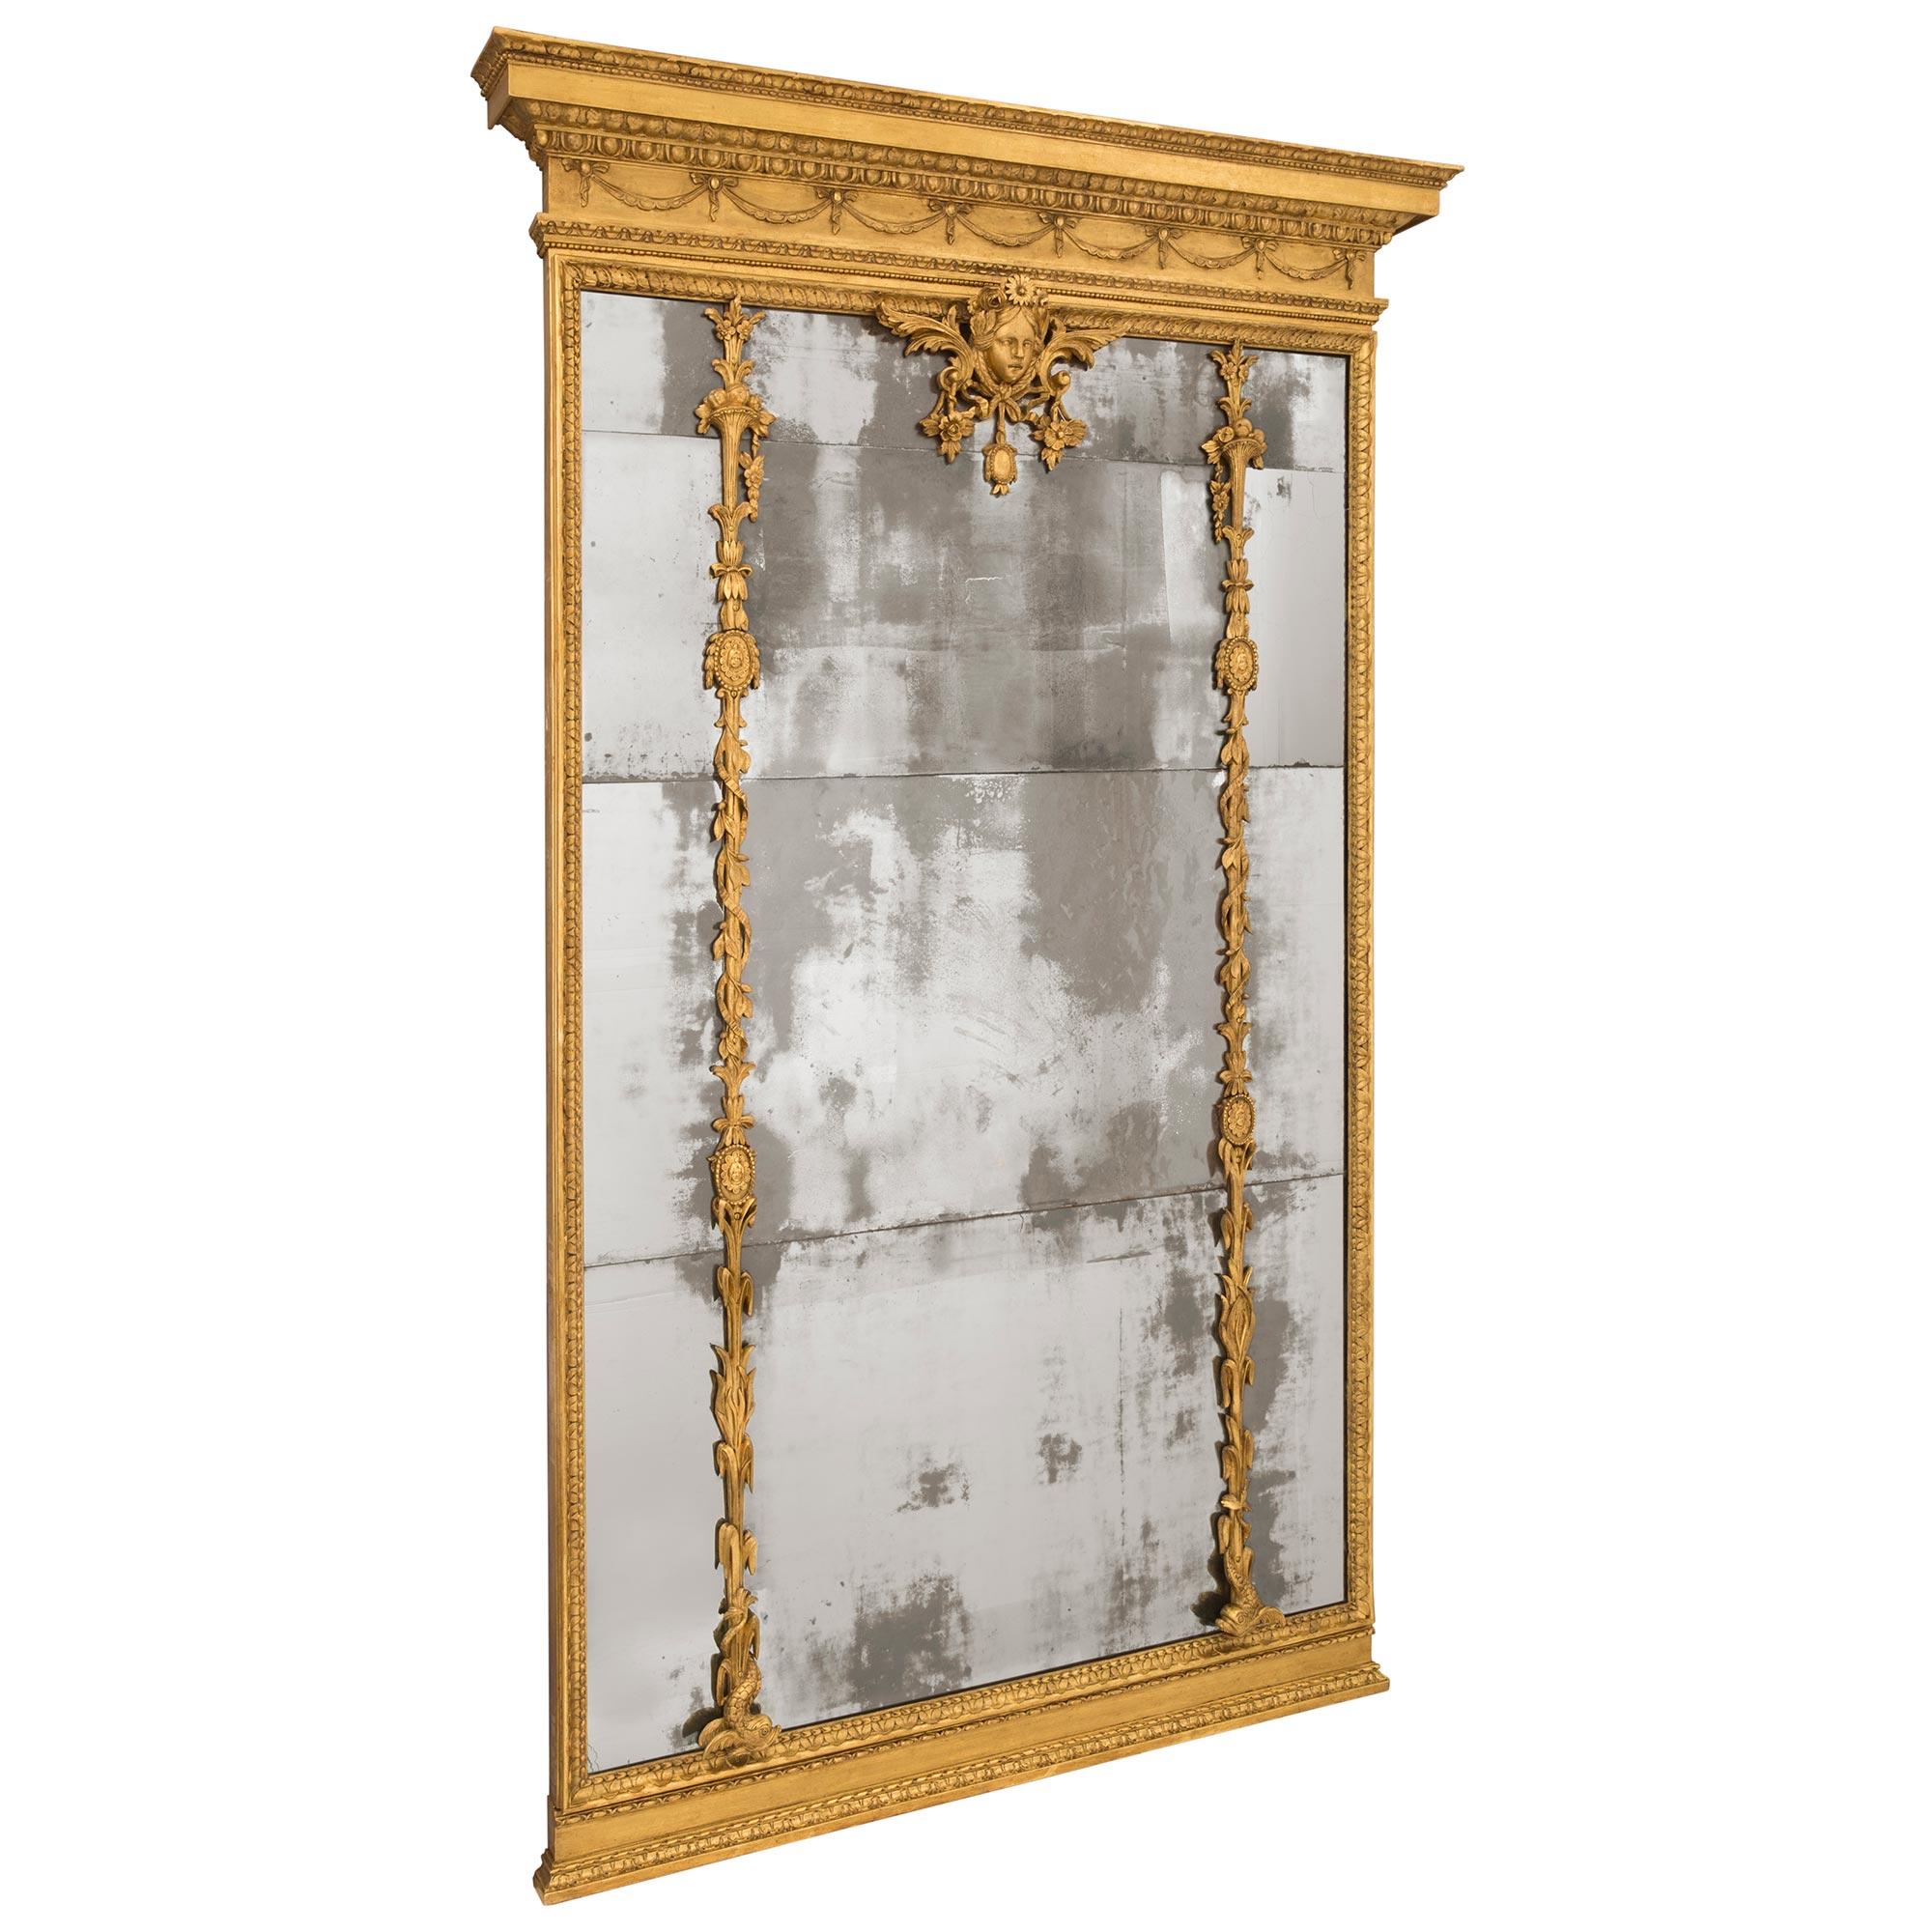 Italian 18th Century Louis XVI Period Giltwood Mirror In Good Condition For Sale In West Palm Beach, FL